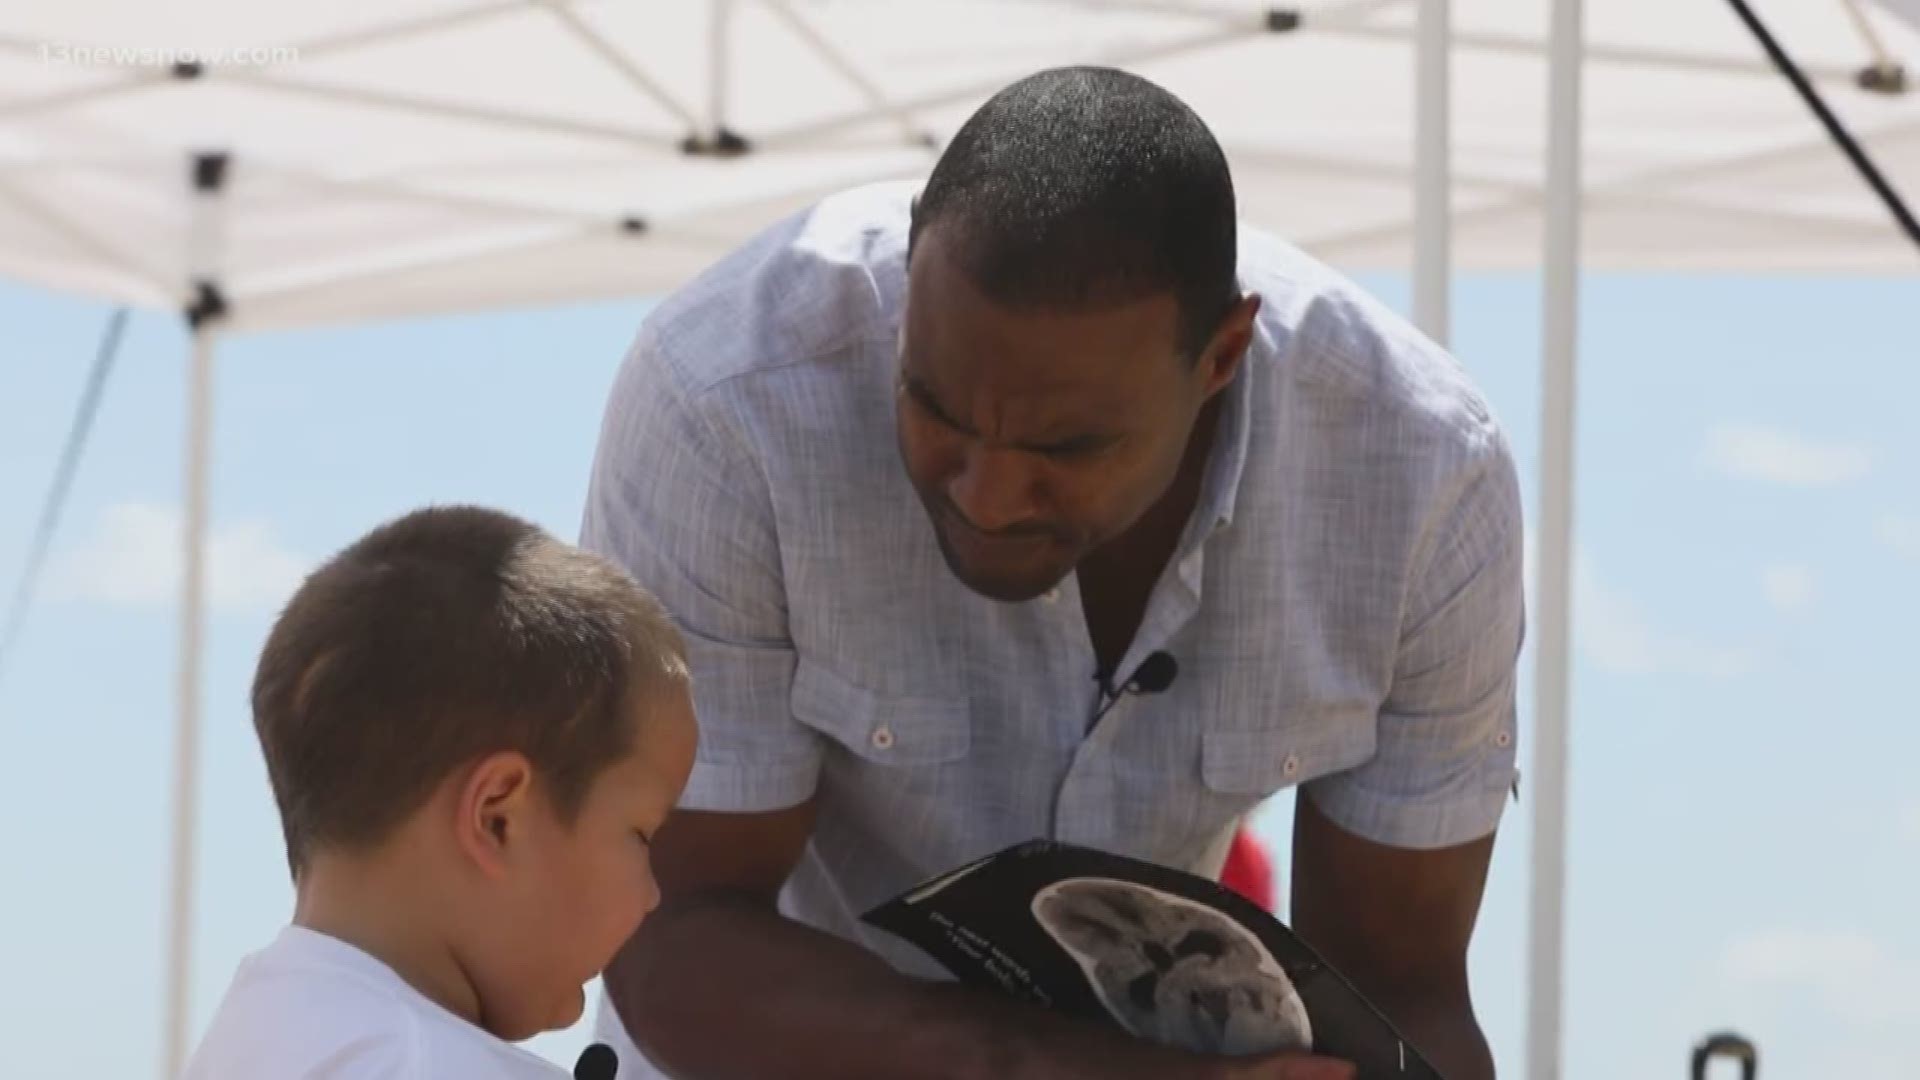 A local Make-A-Wish kid had the opportunity to sit down with Former Dallas Cowboys Safety Darren Woodson to talk about what Make-A-Wish means to them.